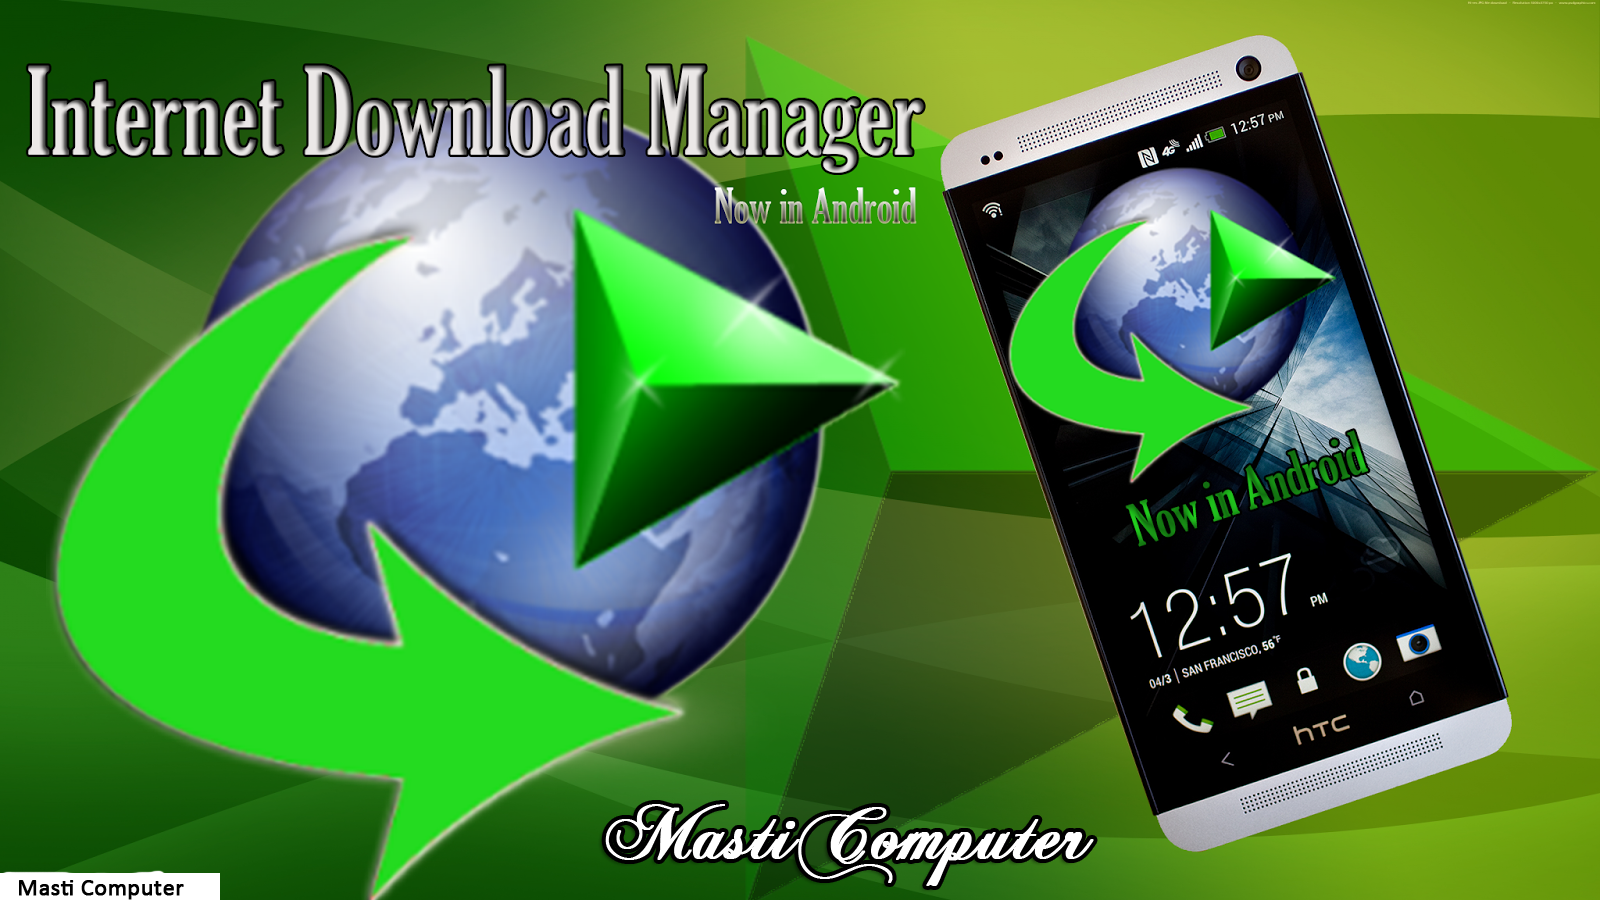 Freeware download manager with resume